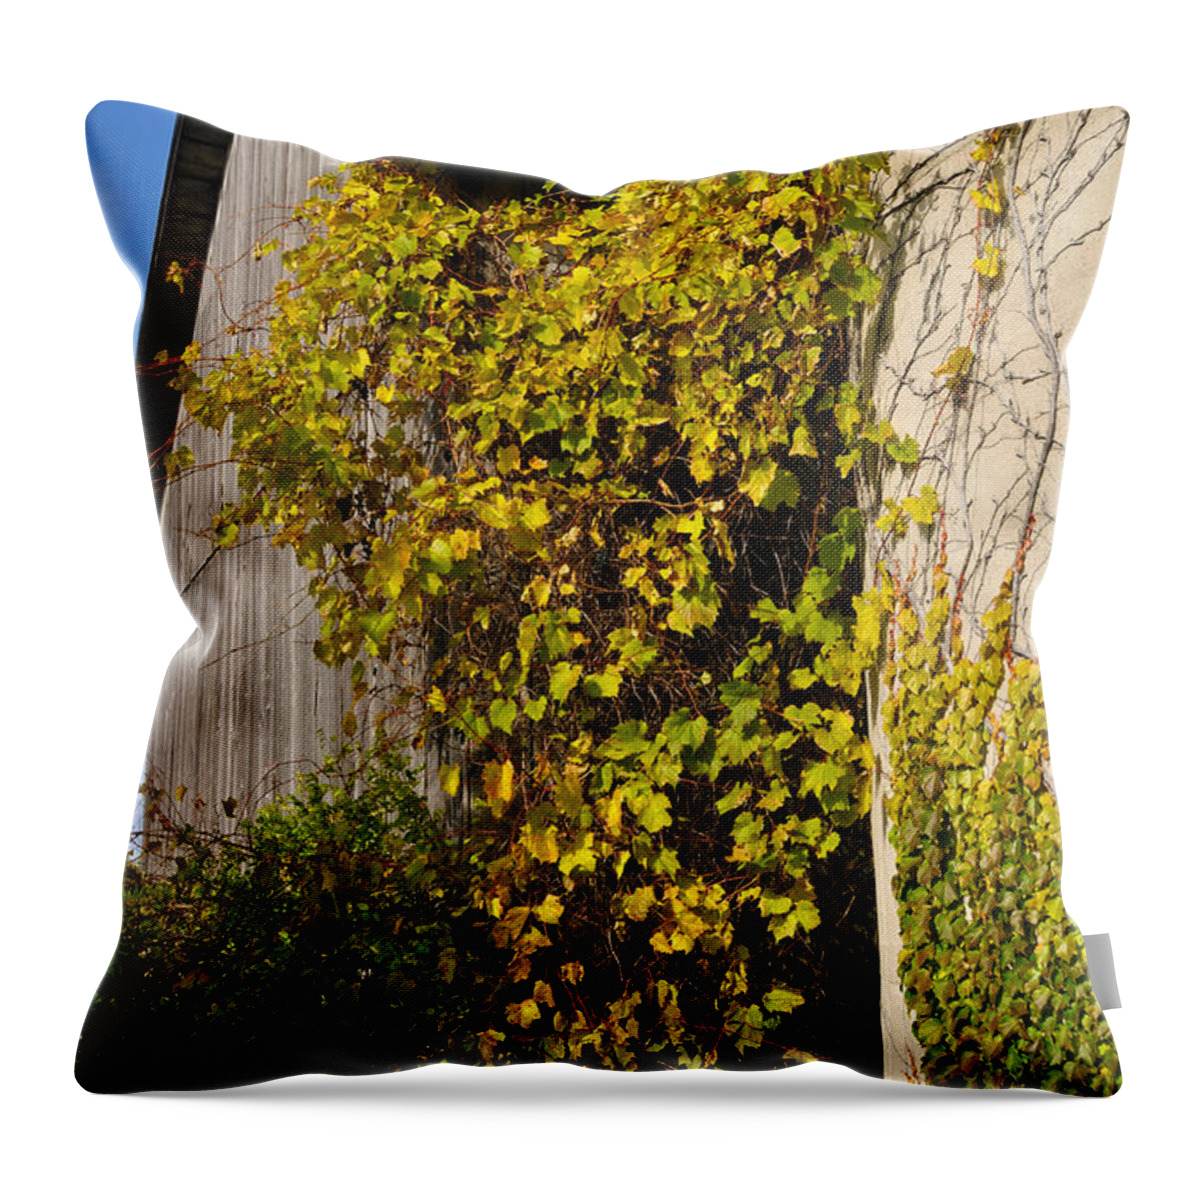 Silo Throw Pillow featuring the photograph Vined Silo by Tim Nyberg